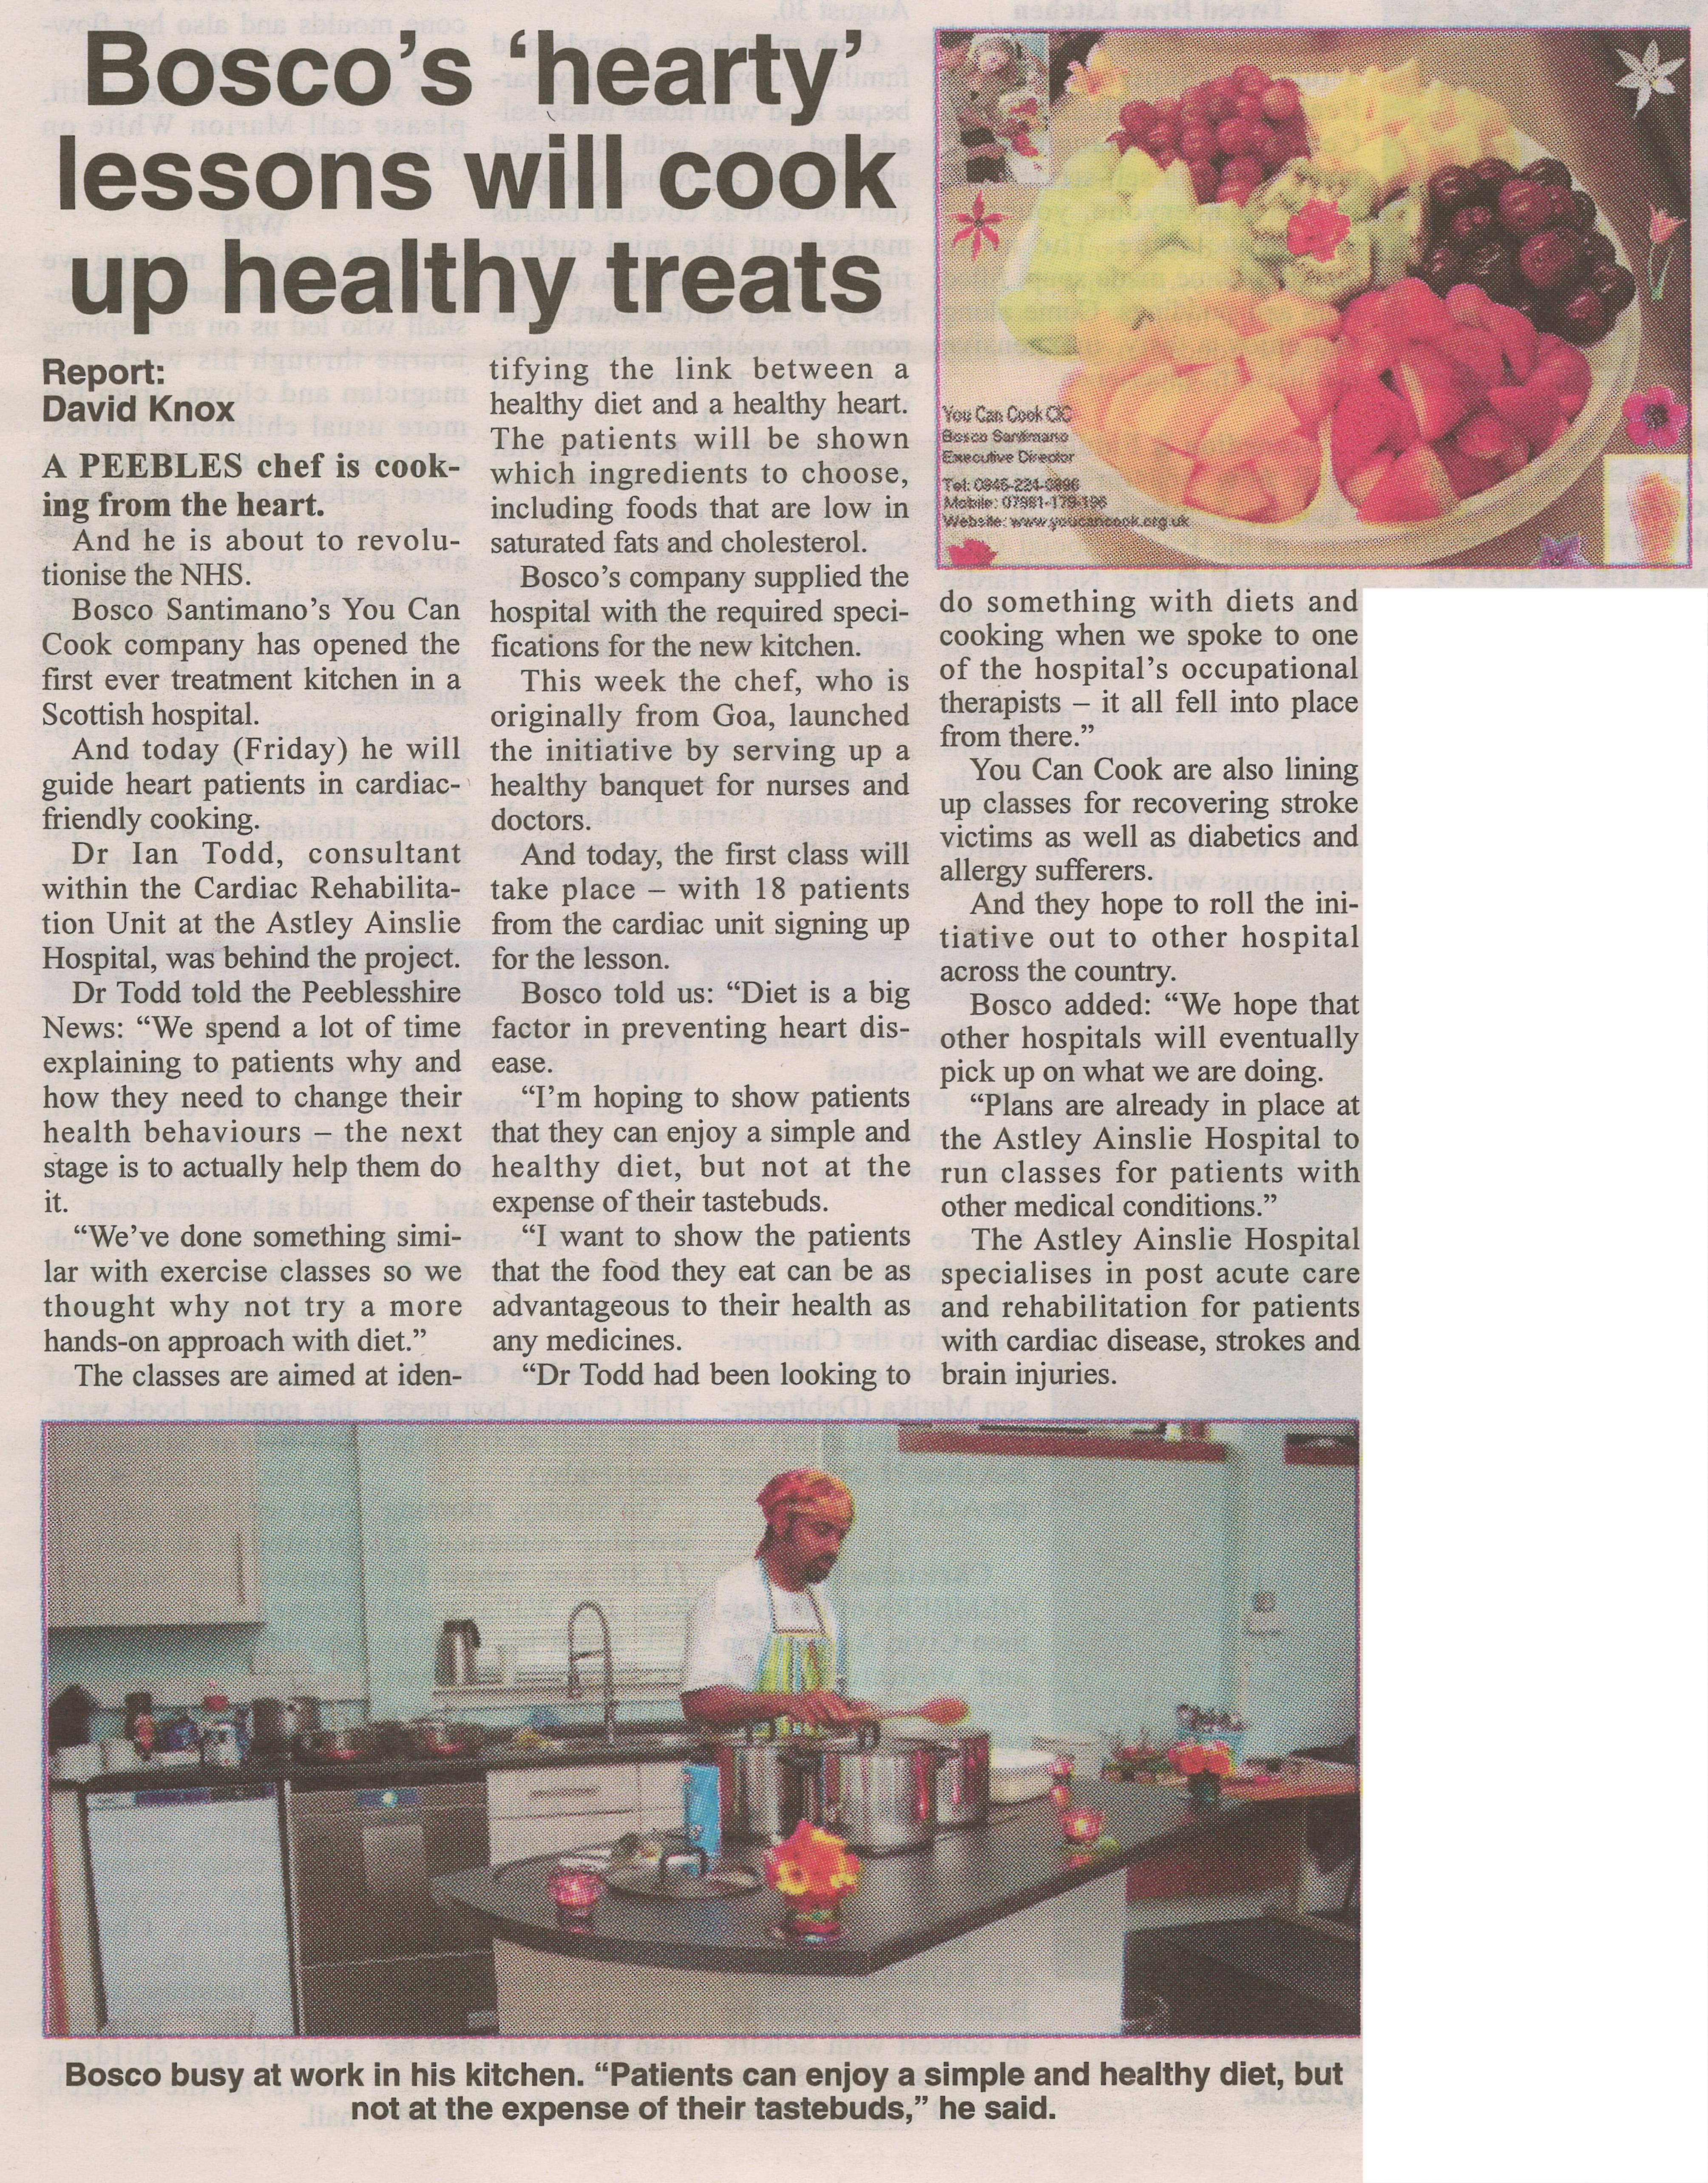 Press Clipping: Bosco's hearty lessons will cook up healthy treats